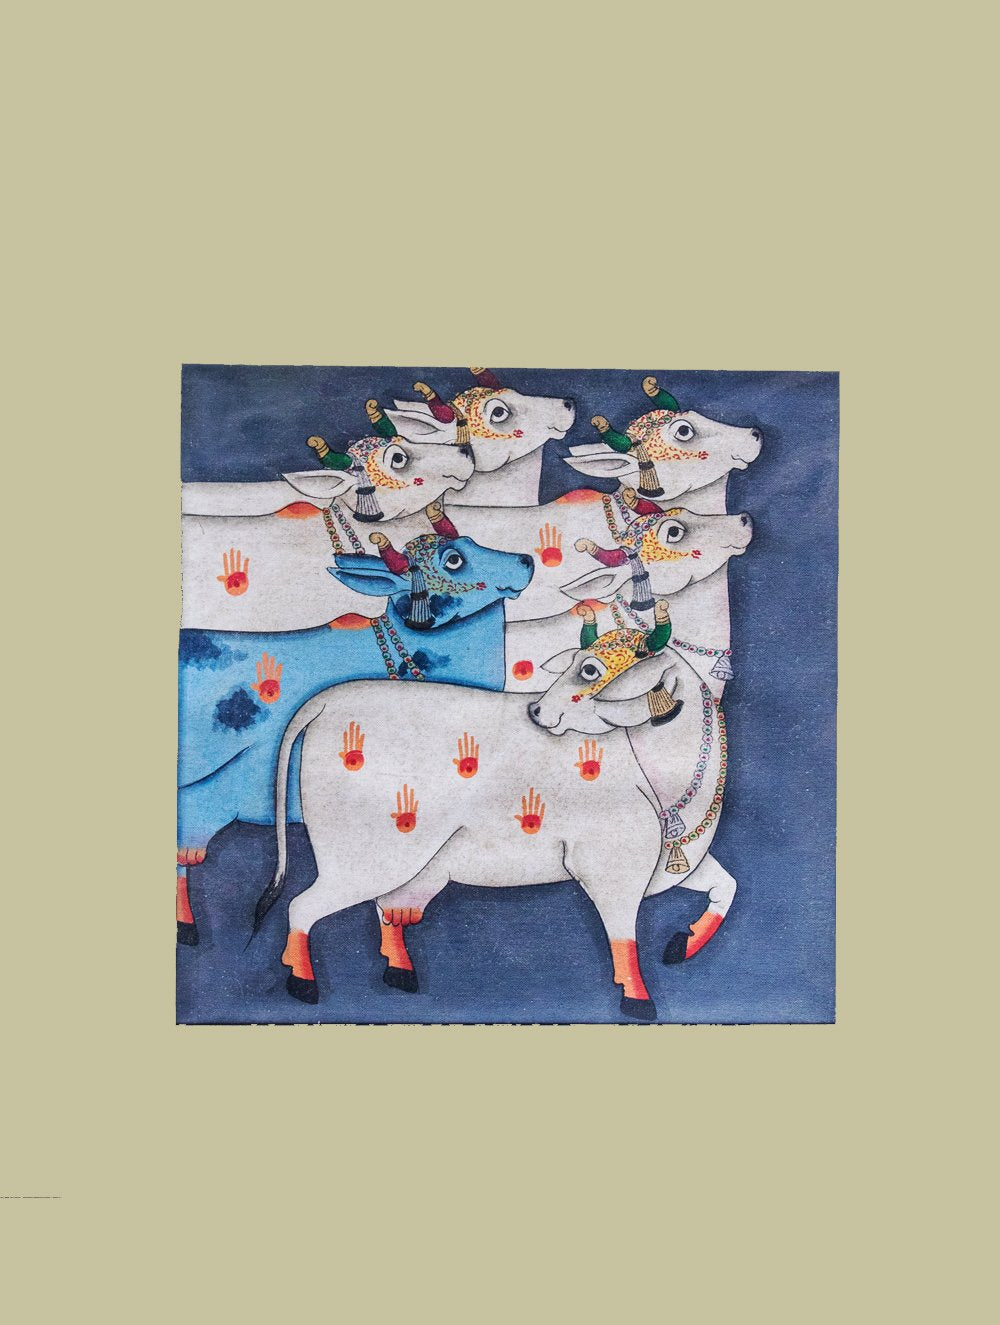 Load image into Gallery viewer, Pichwai Painting ❃ Srinathji disguised as Cow